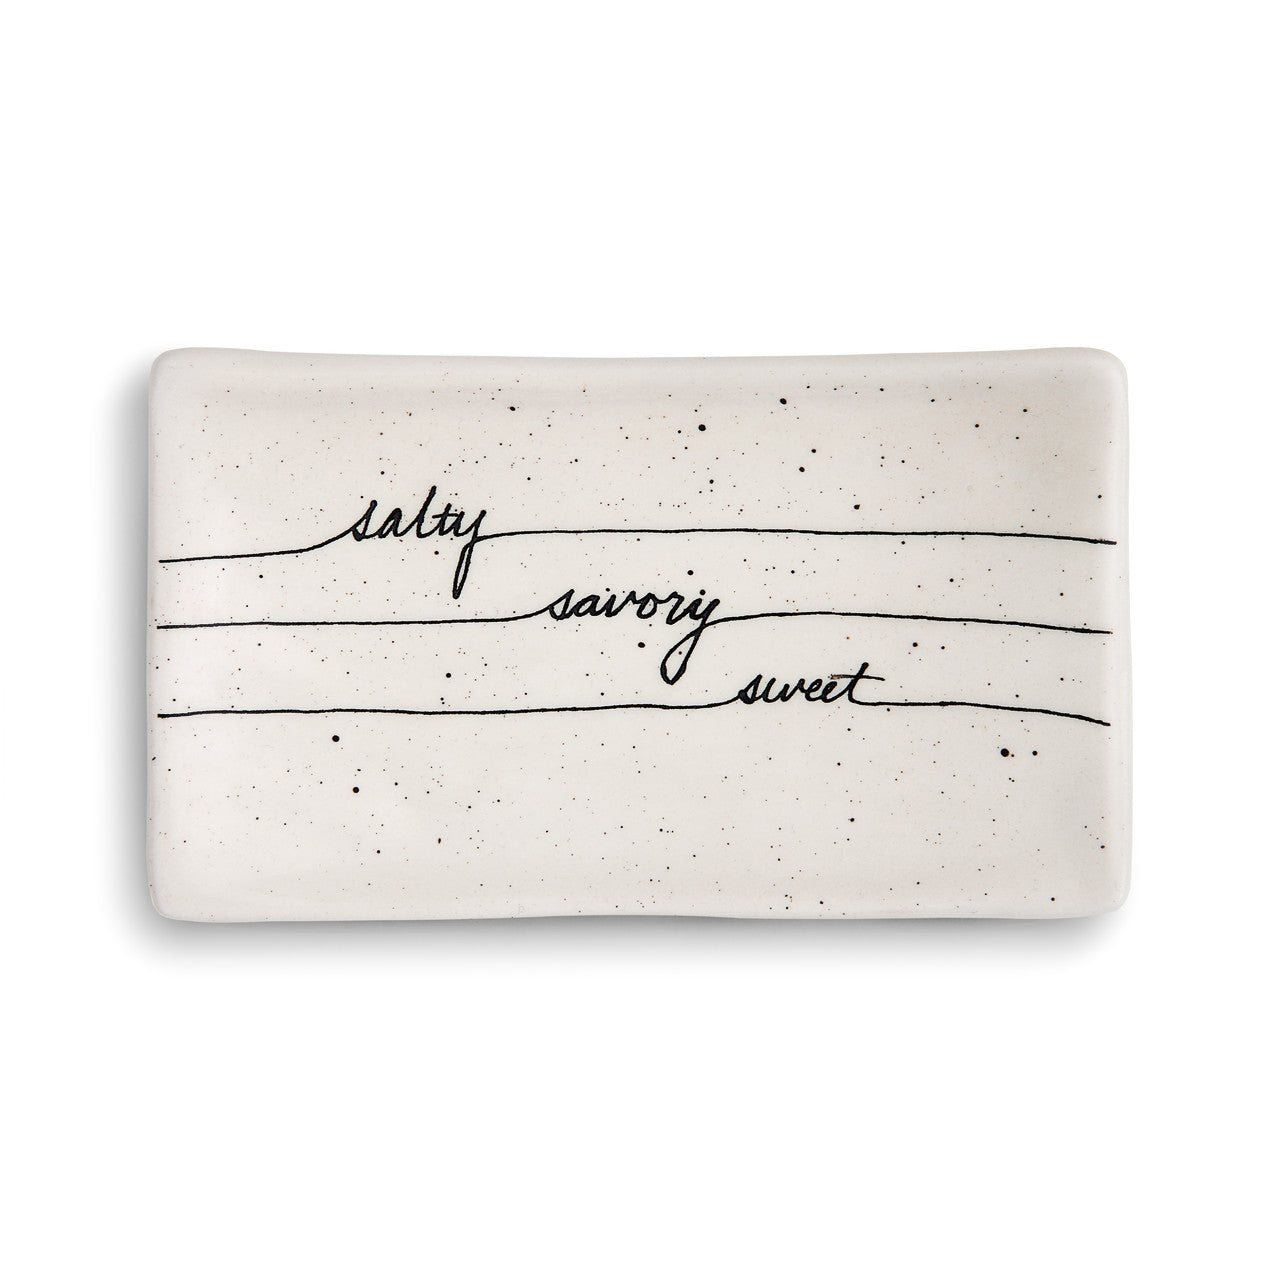 SALTY SAVORY SWEET RECTANGLE SPOON REST